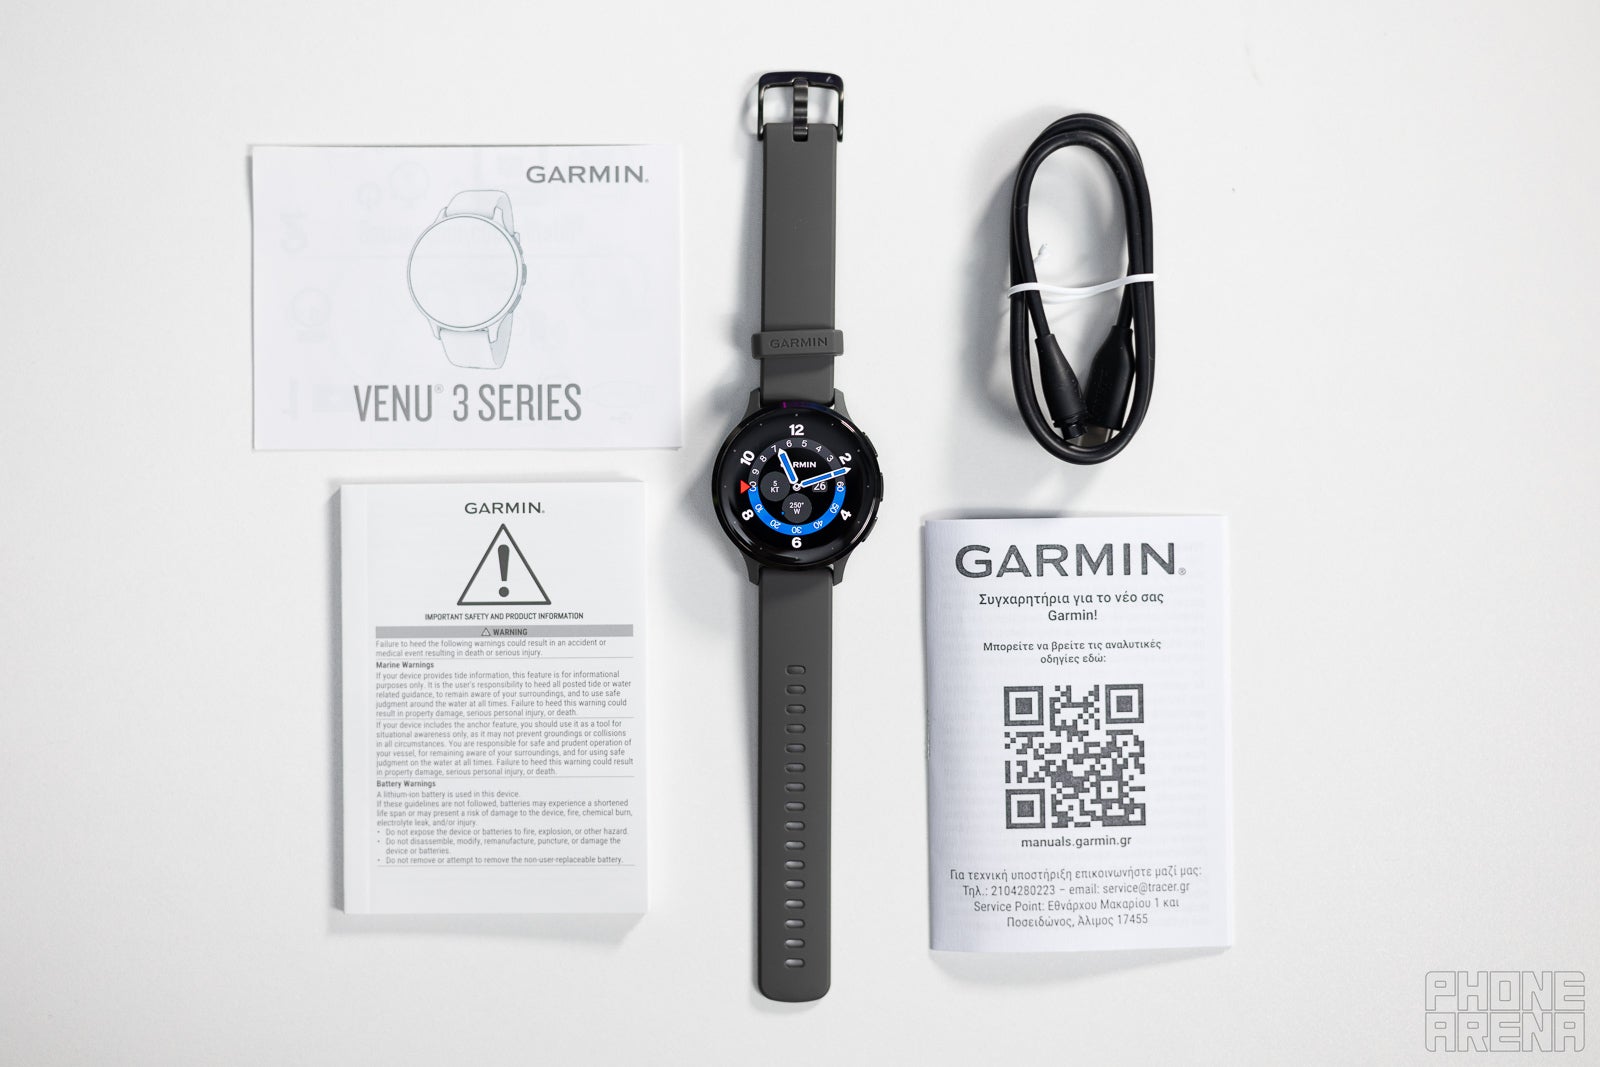 Garmin Venu 3S review: Superb but pricey - Can Buy or Not